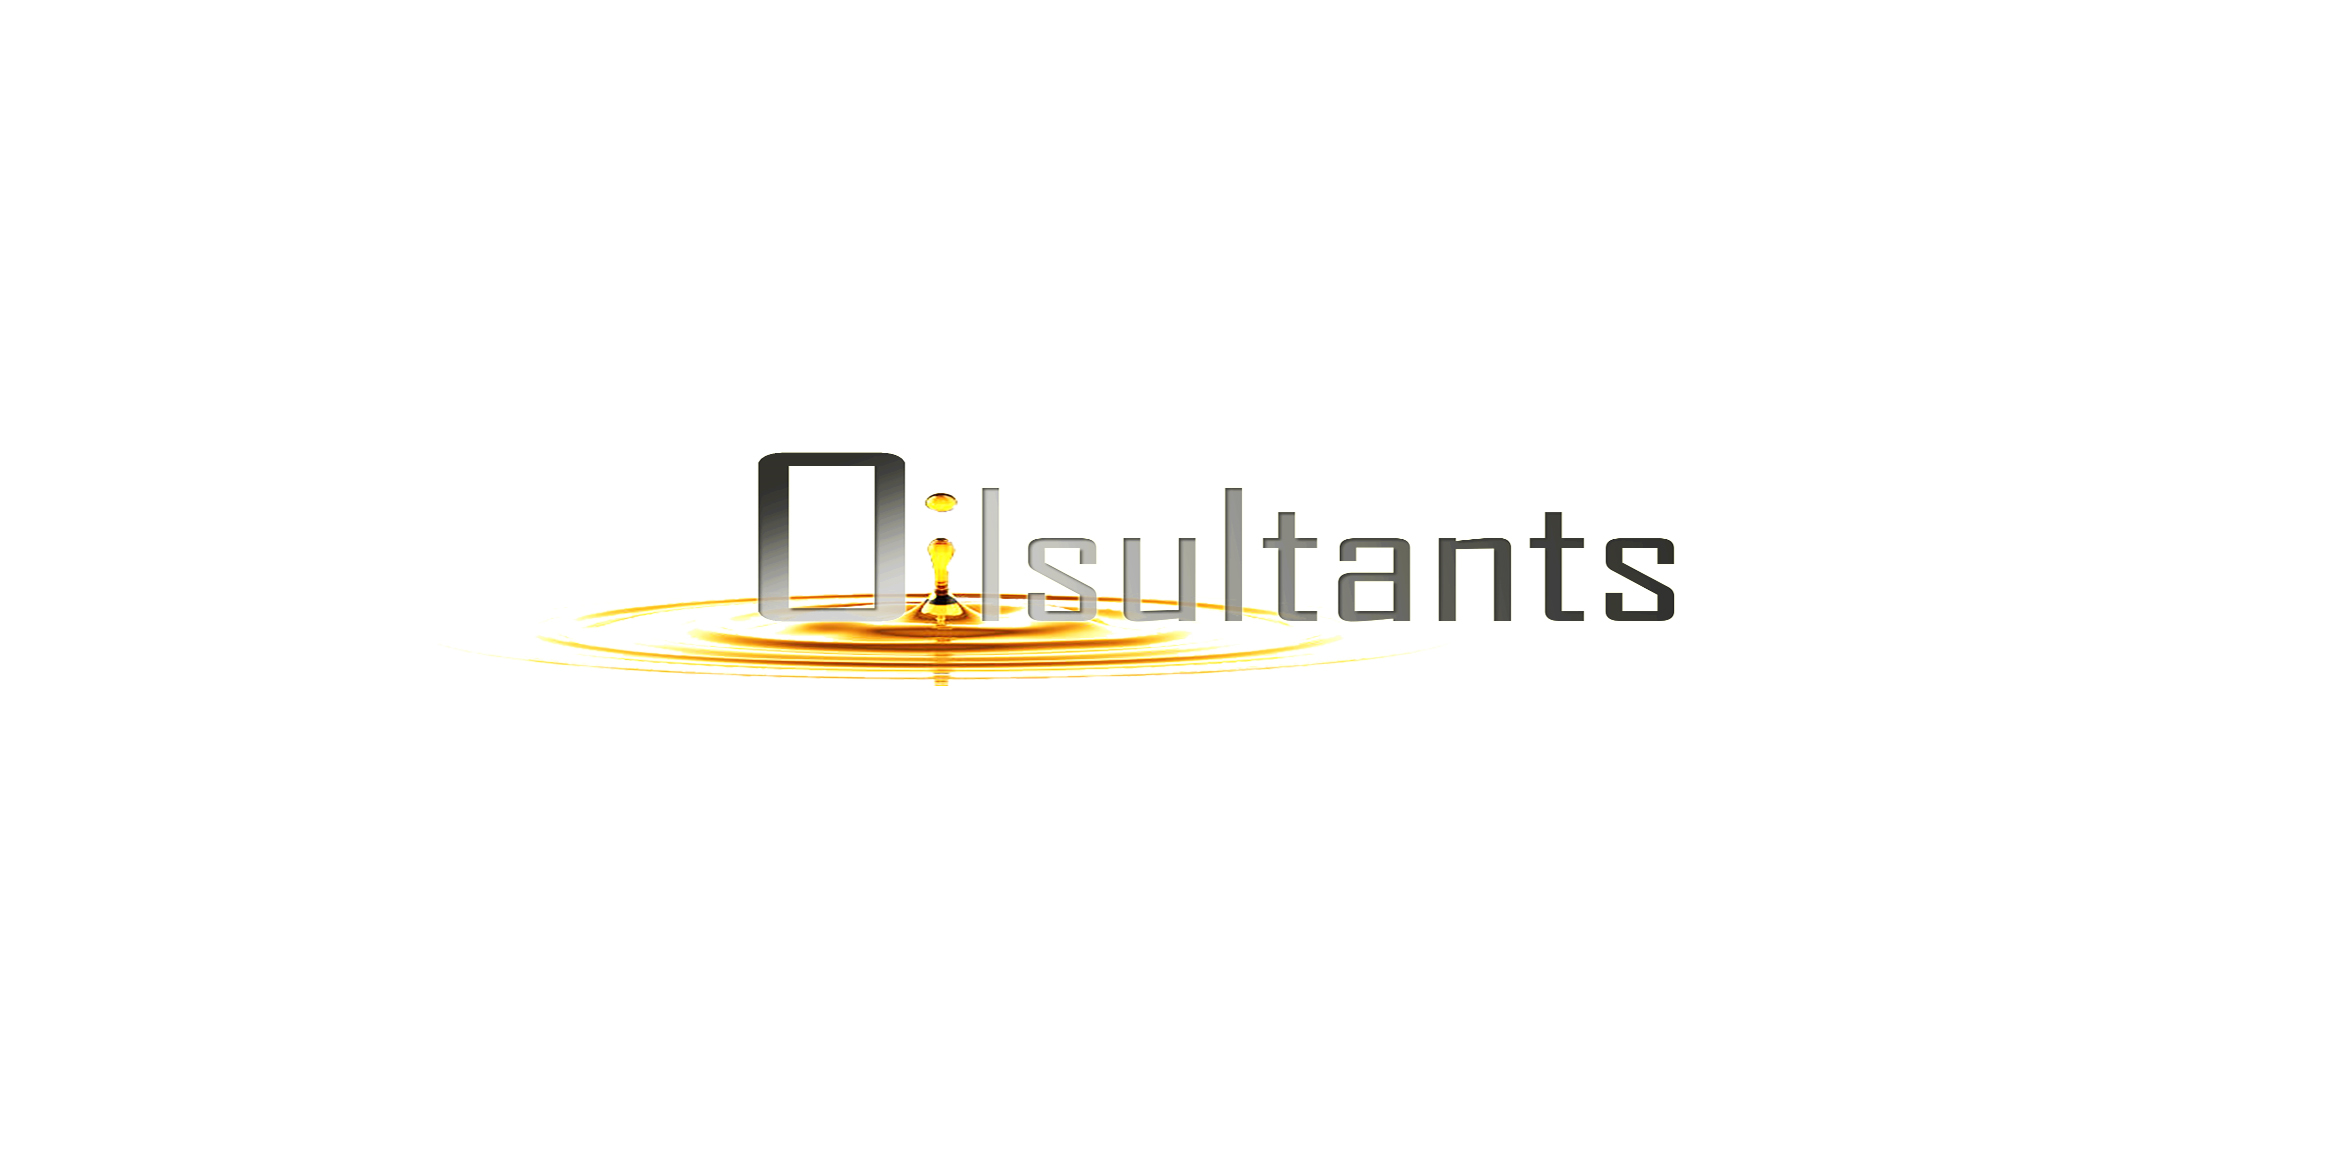 Oil and Fuel management consultants